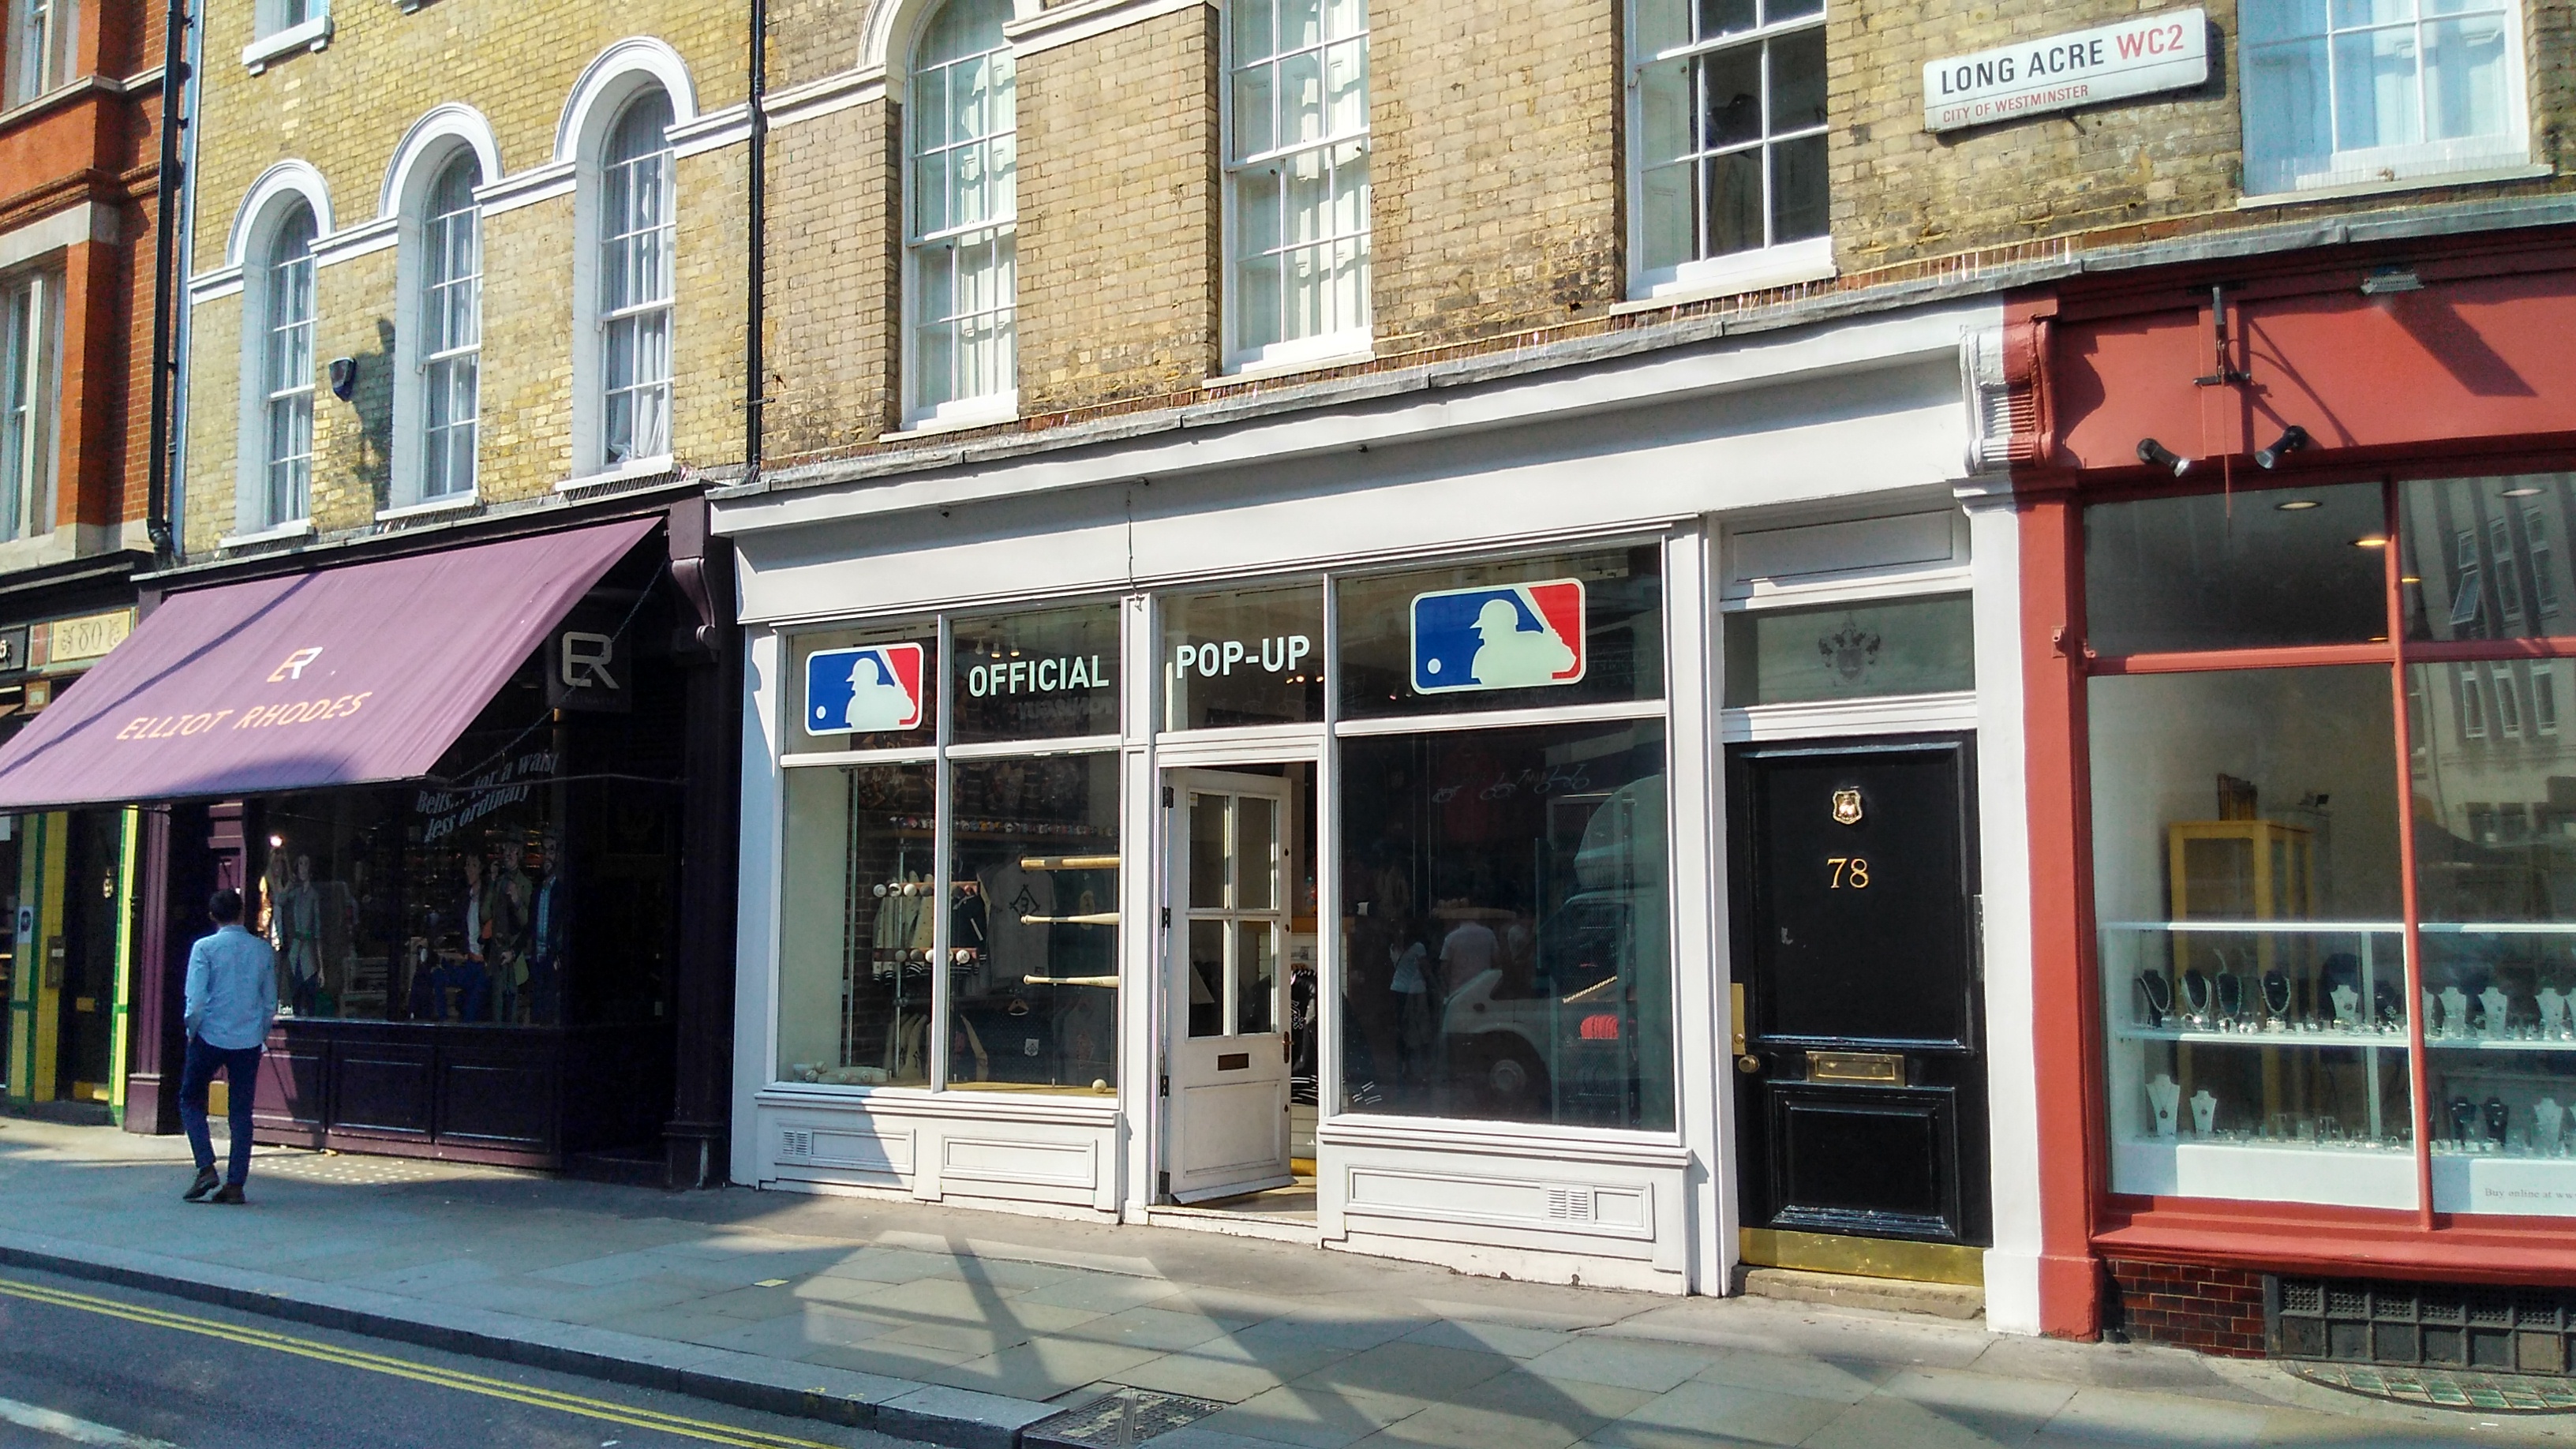 Taking a look at the new MLB pop-up store in London Wait until next year